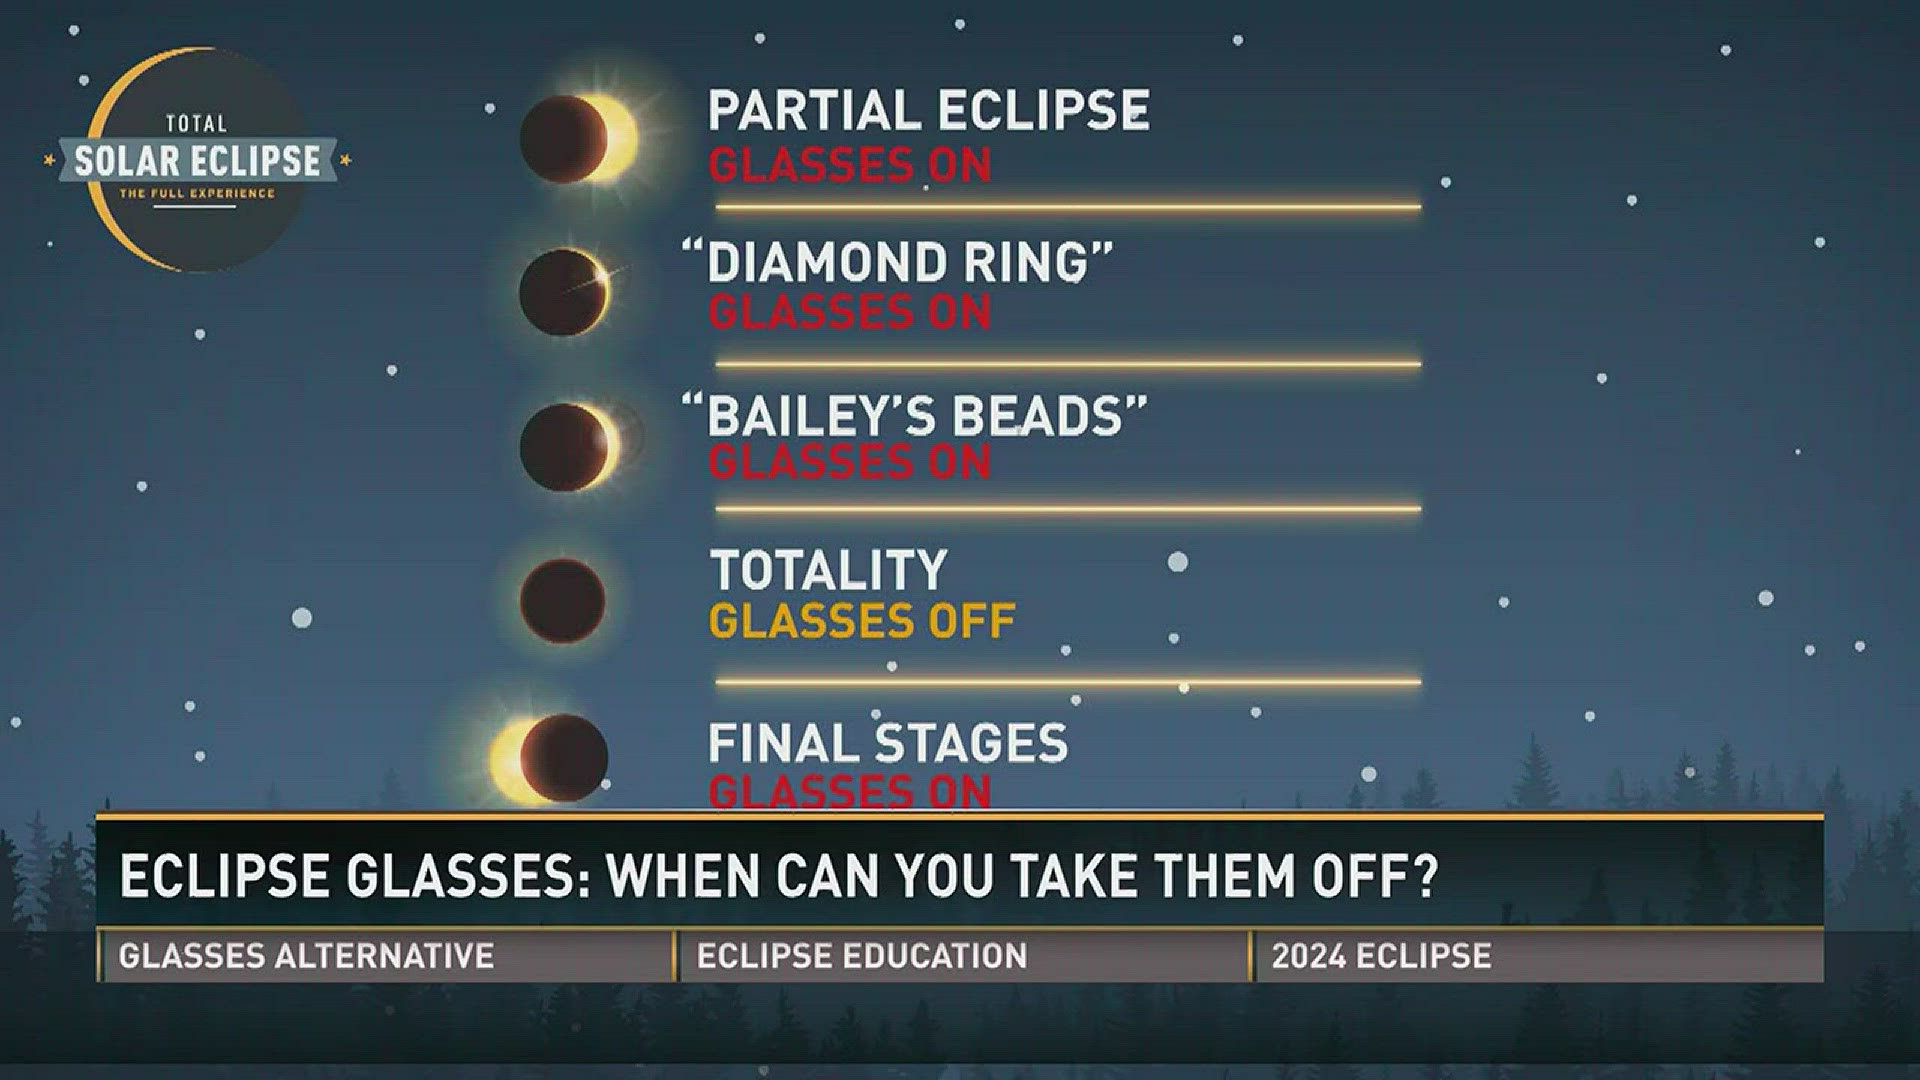 You don't have to wear your glasses when the eclipse is in totality, but all times before and after, you need to view the eclipse through your special glasses.